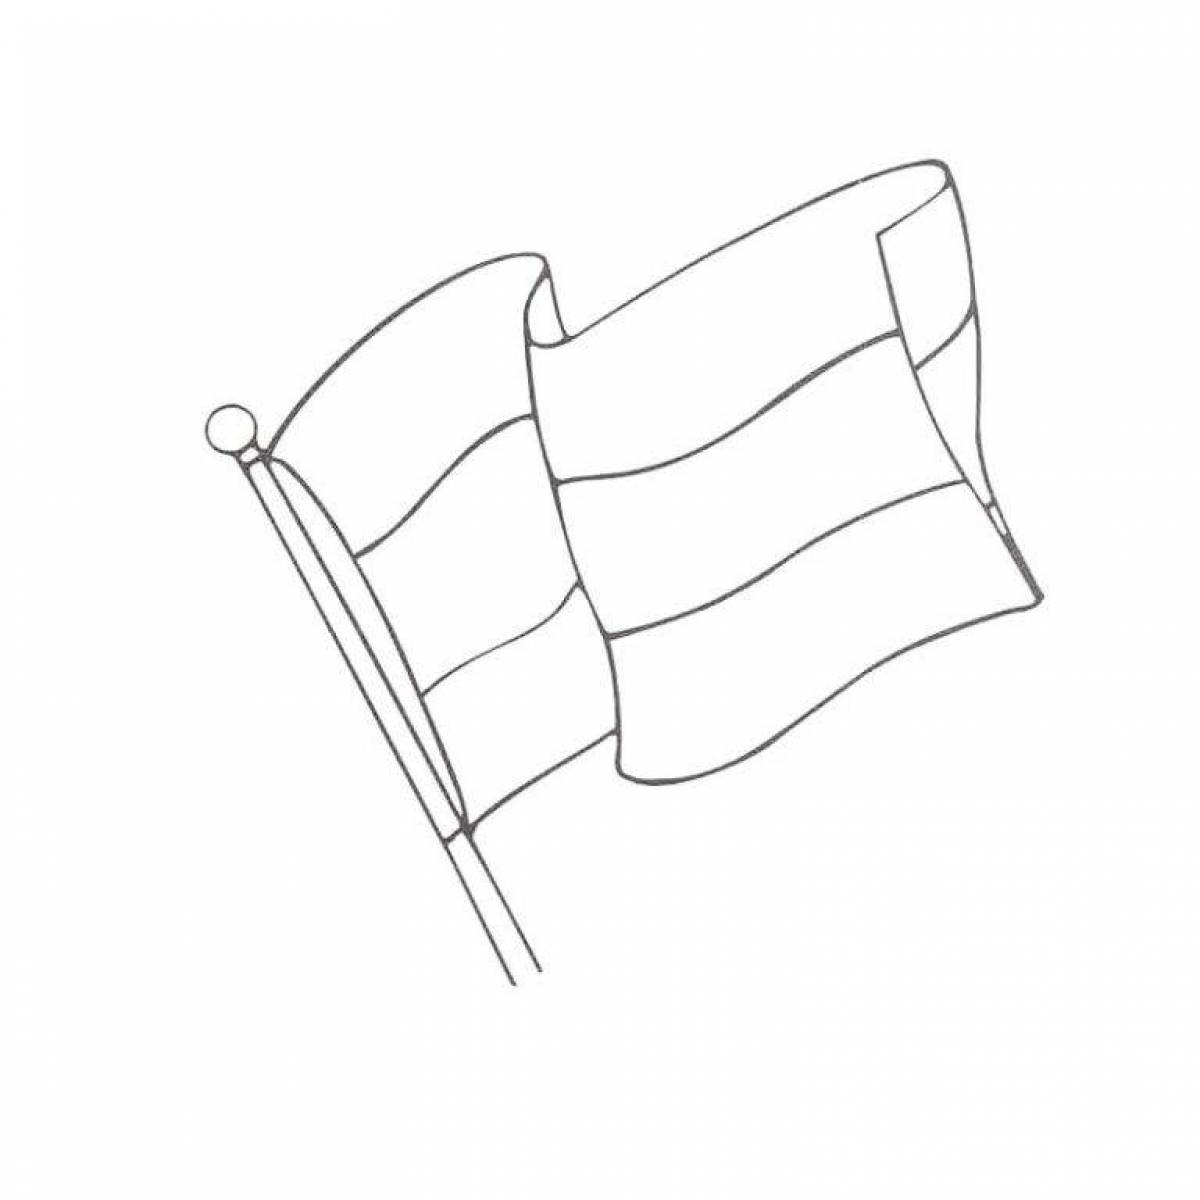 Glorious Russian flag coloring page for kids